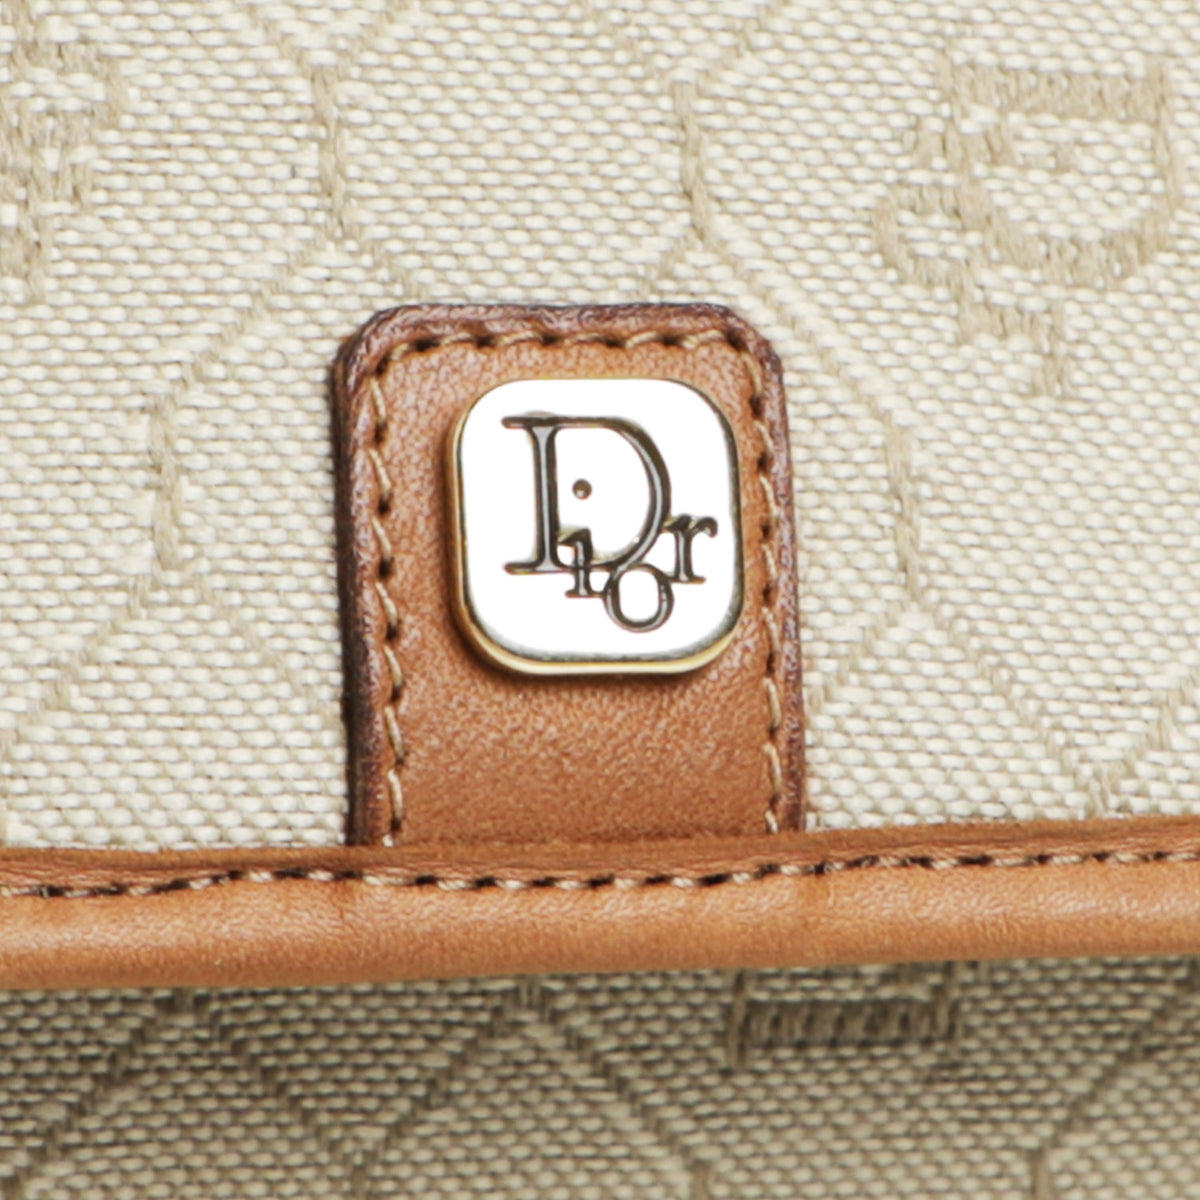 Christian Dior Clutch Authentic Beige Honeycomb Fabric & 